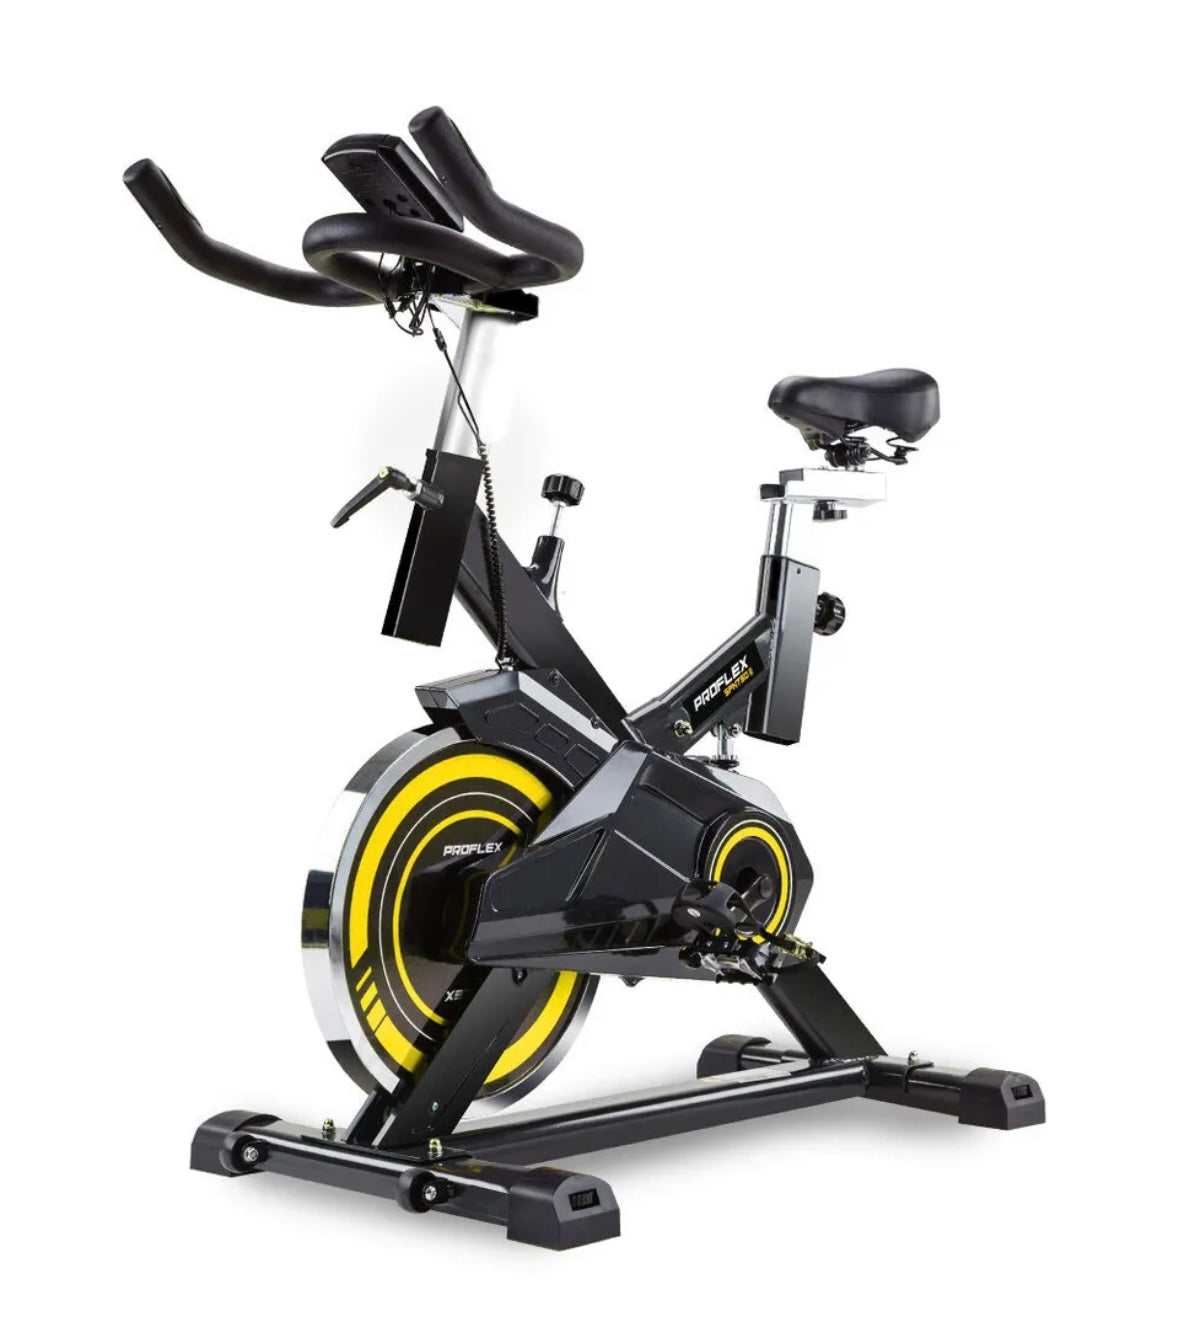 AGFC COMMERCIAL SPIN BIKE